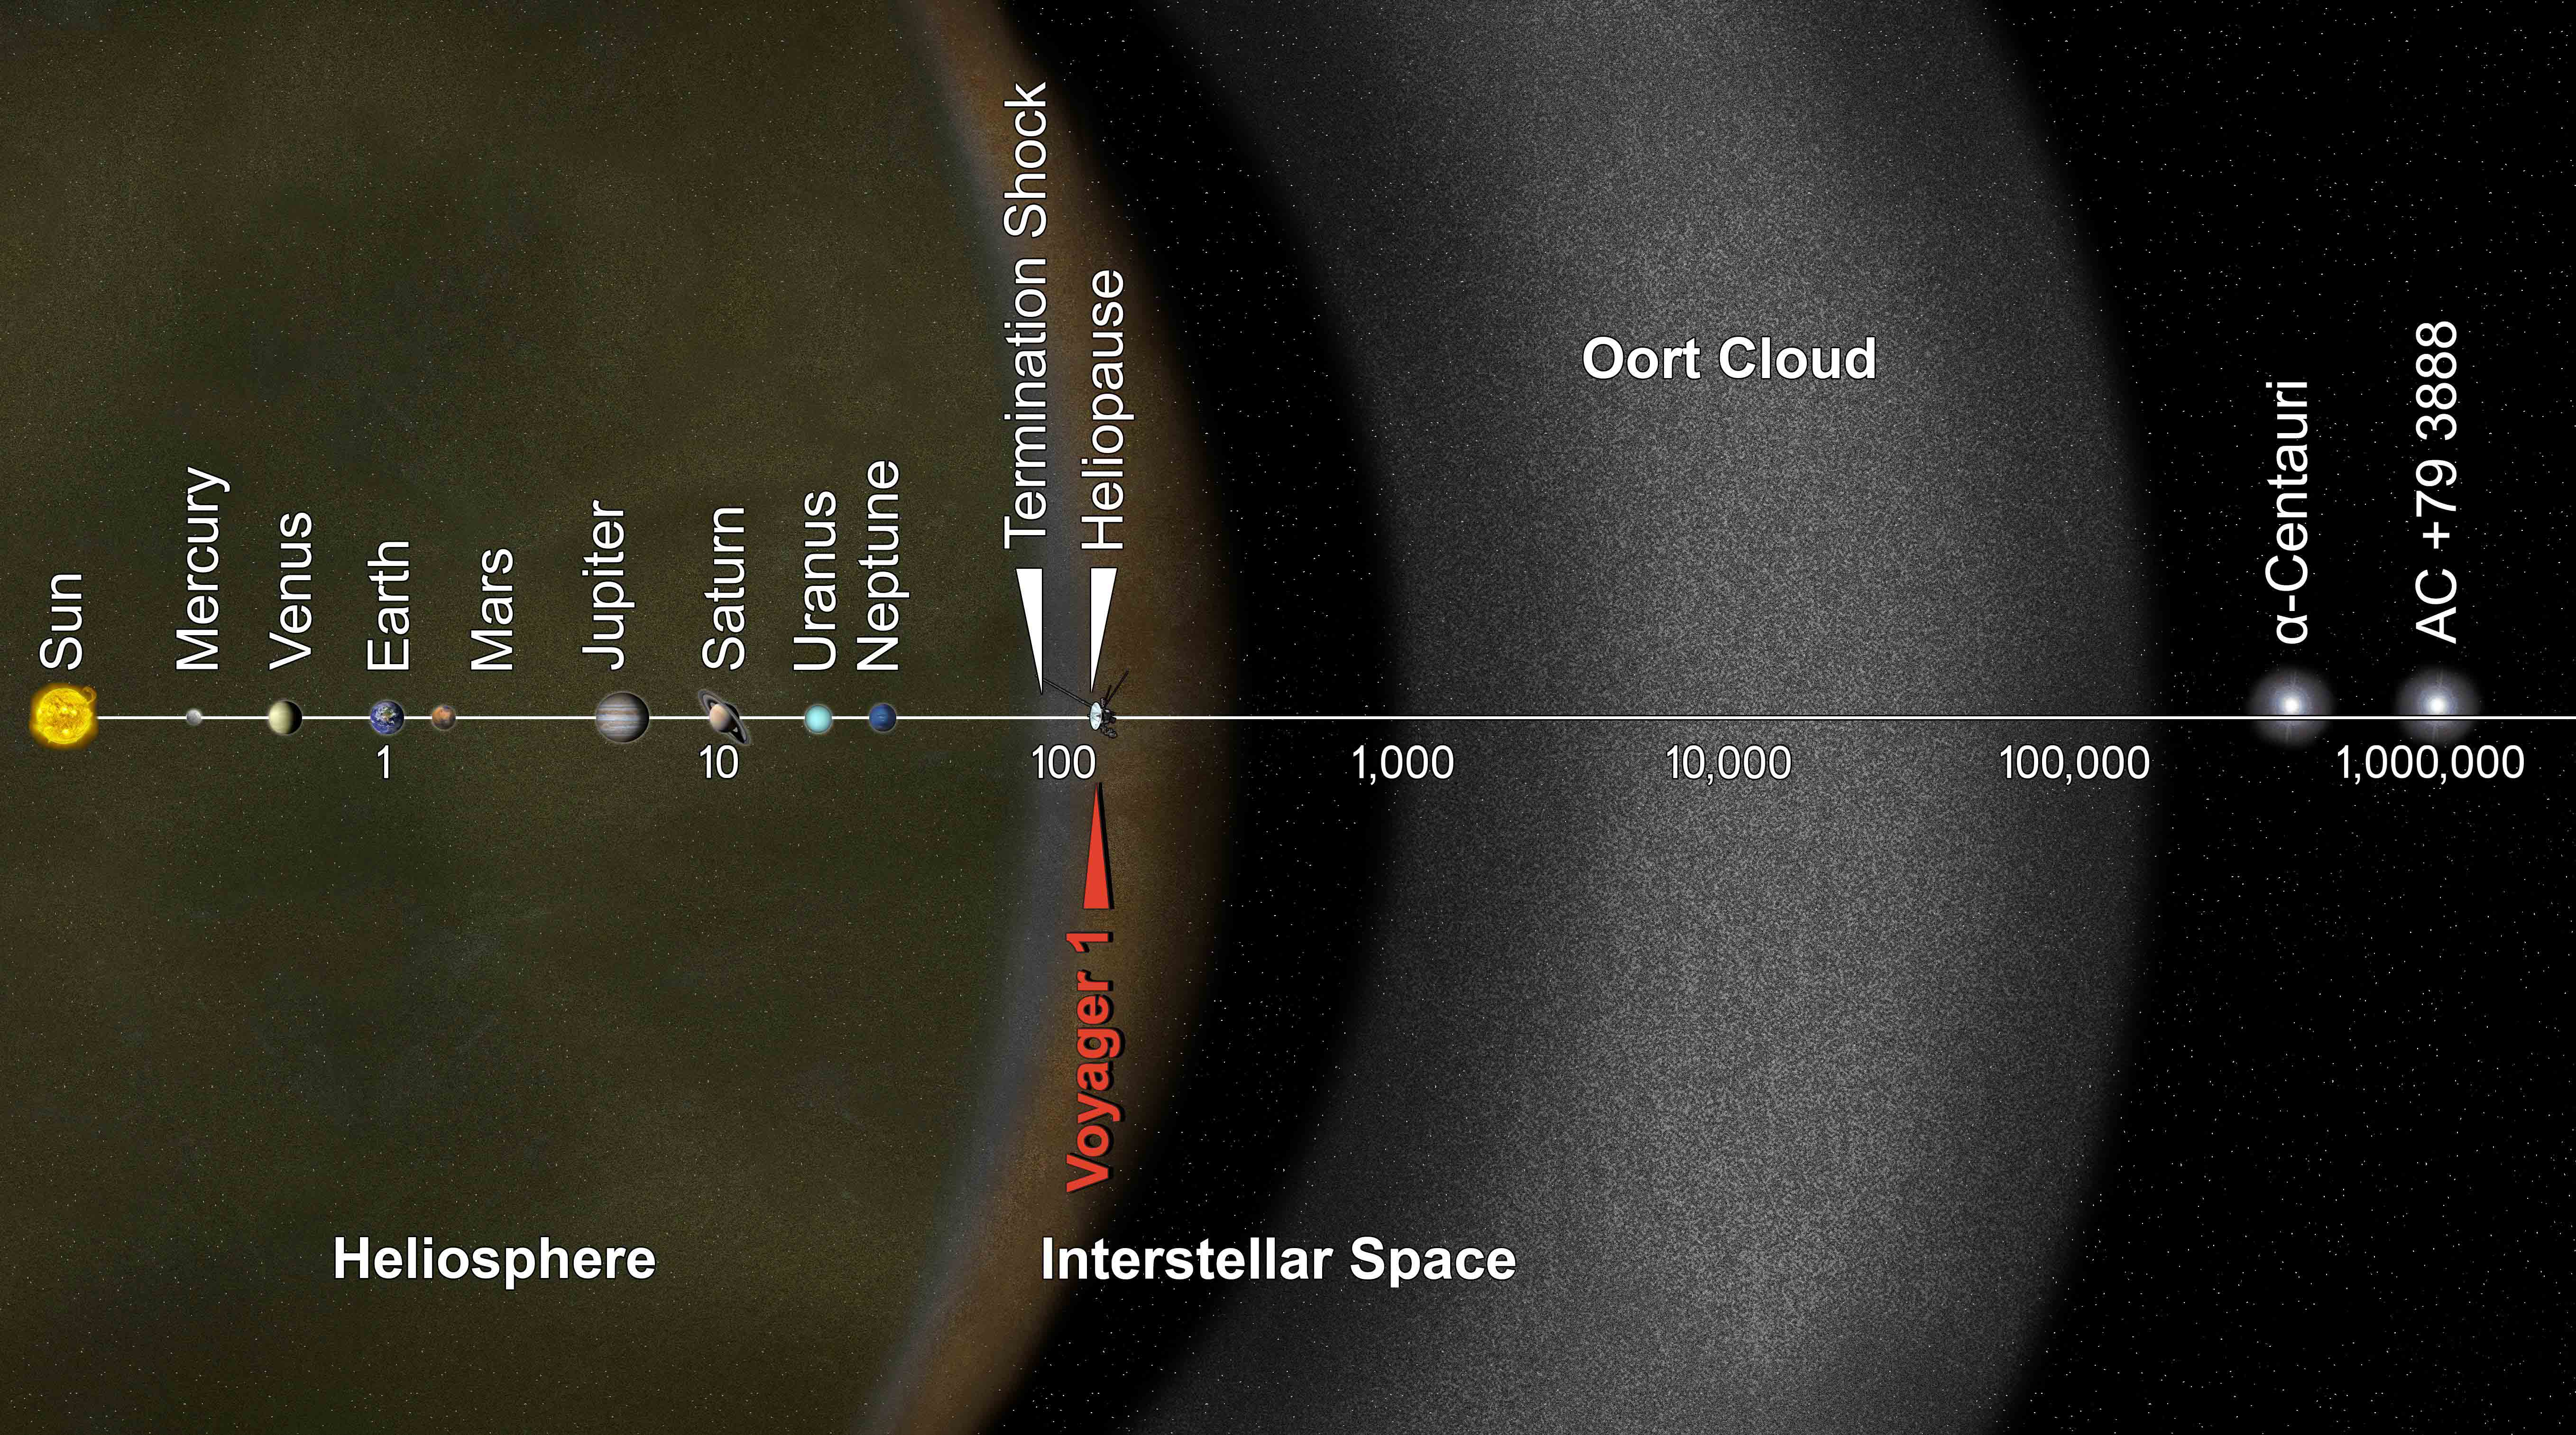 An artist's impression shows the far distance between the Sun and the Oort Cloud.